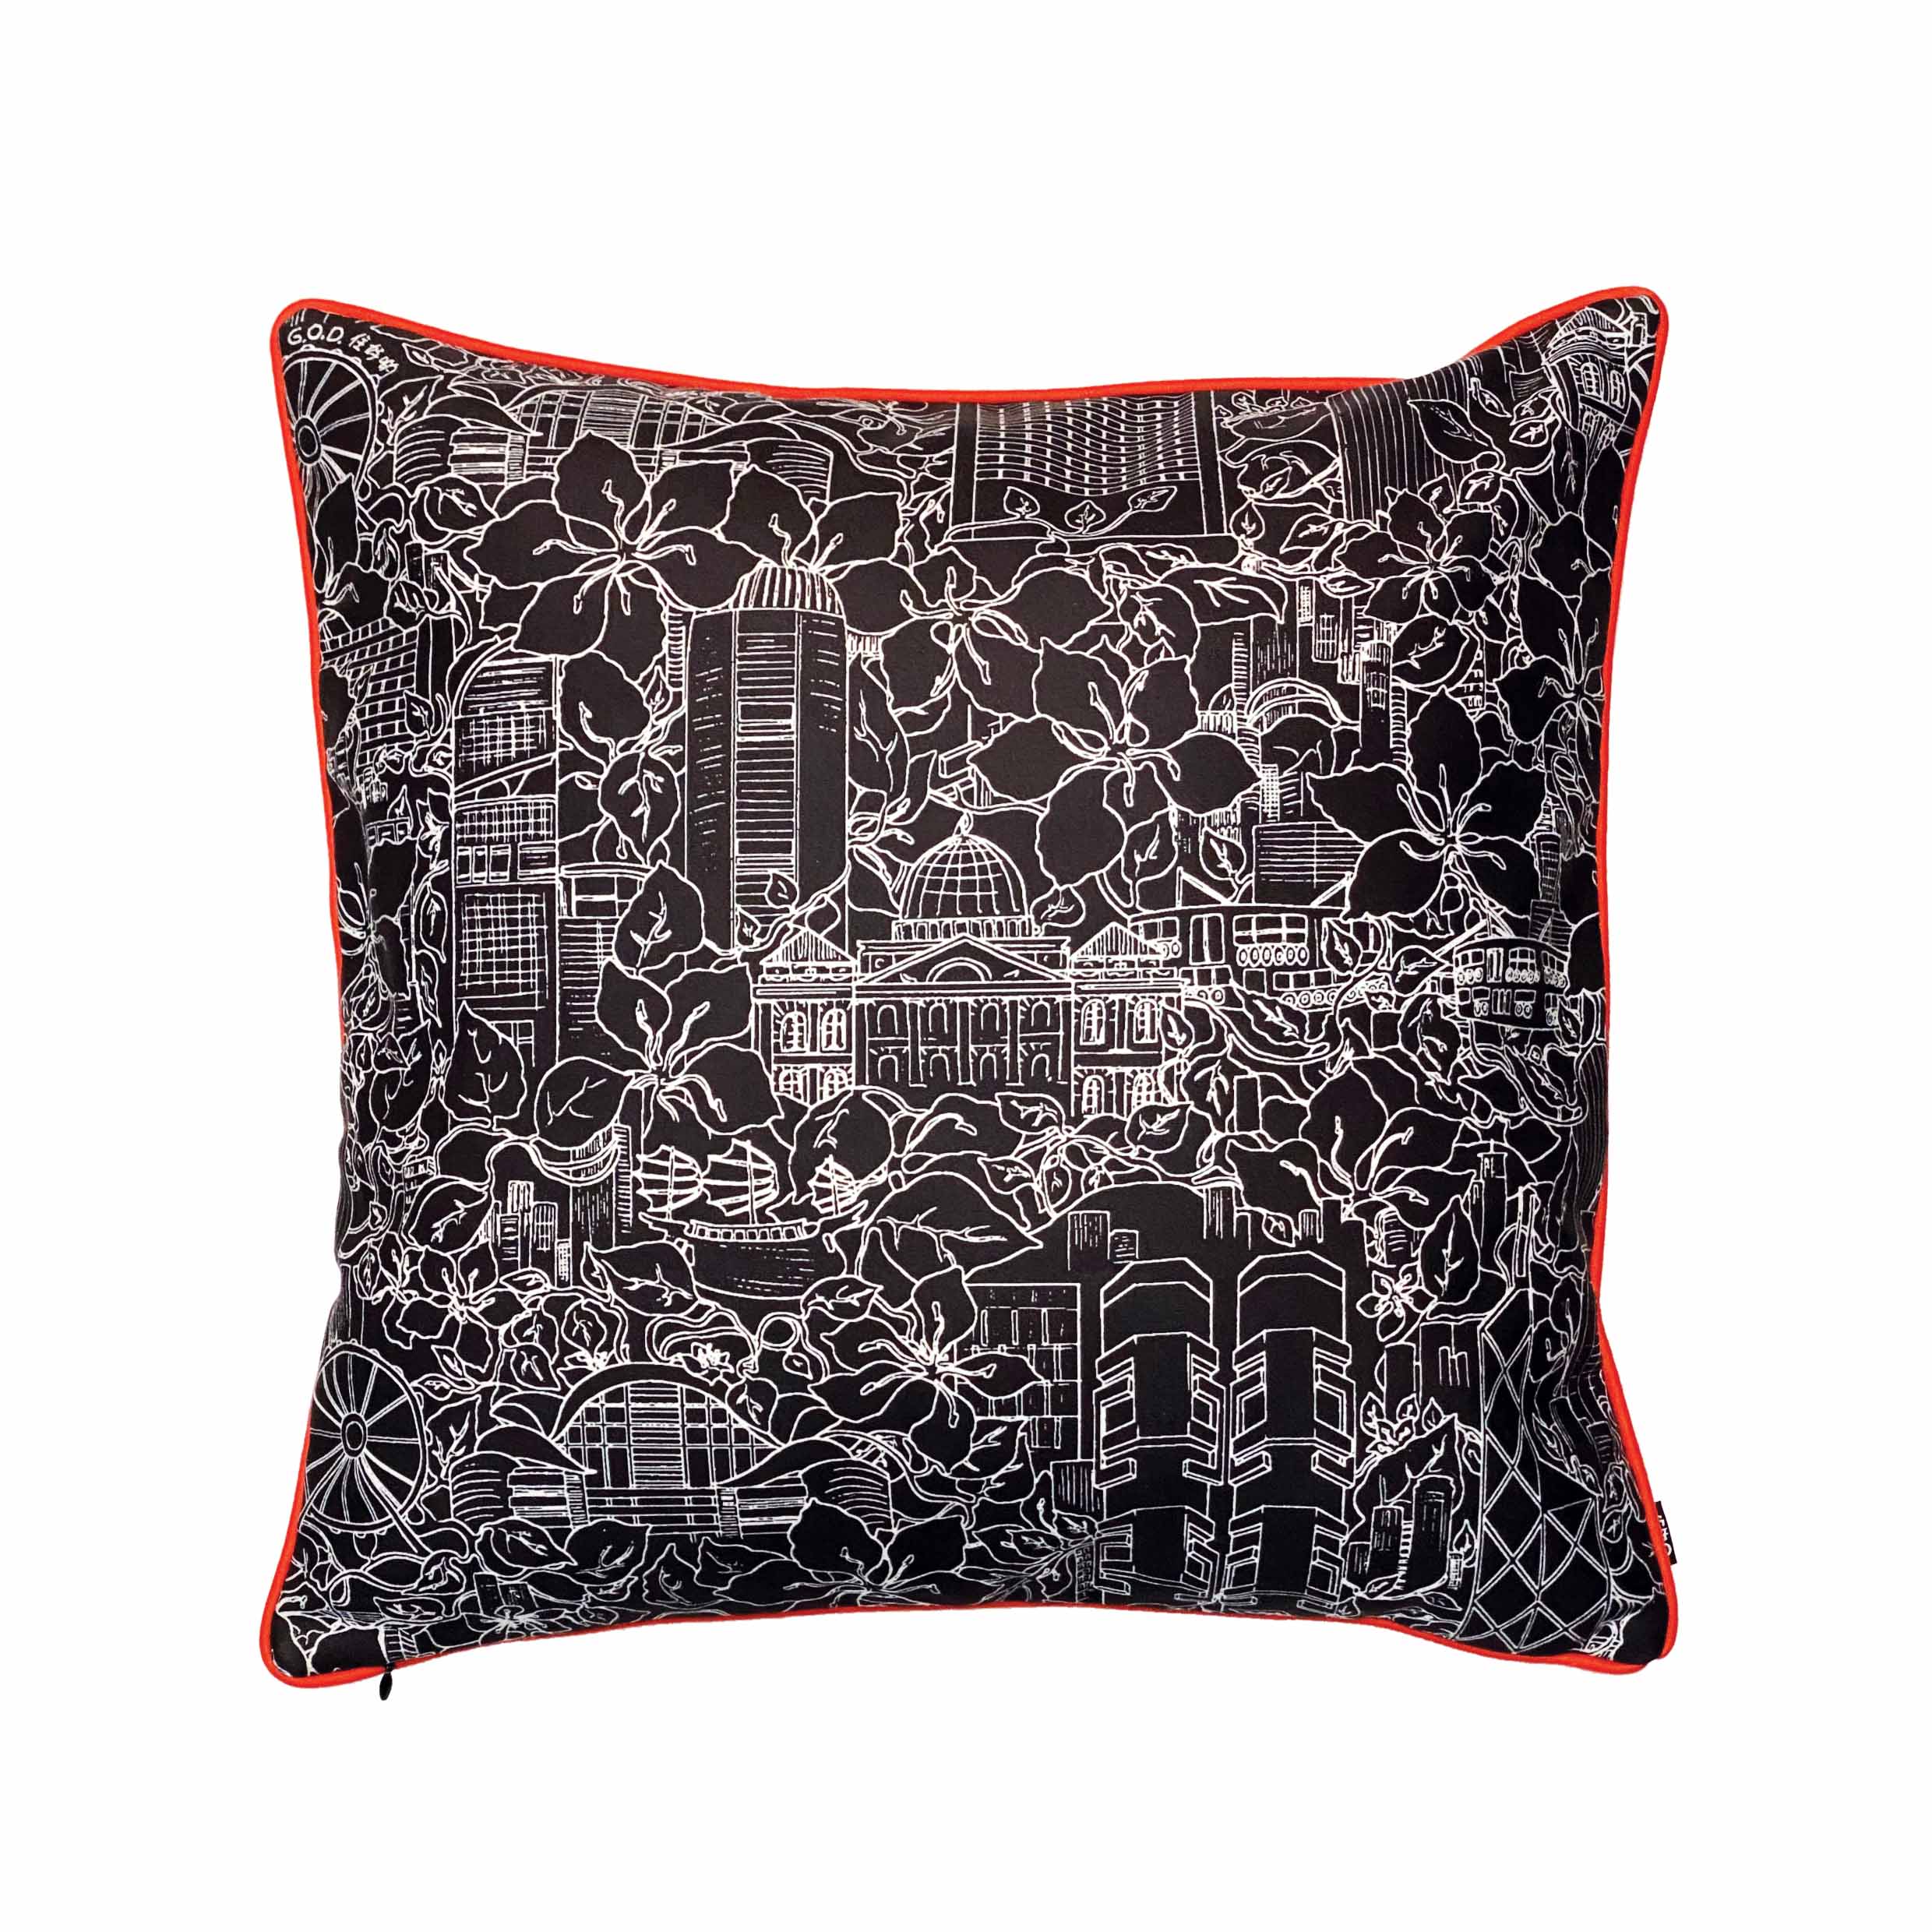 HK Jungle Sketch Double-Sided Cushion Cover, 45 x 45 cm